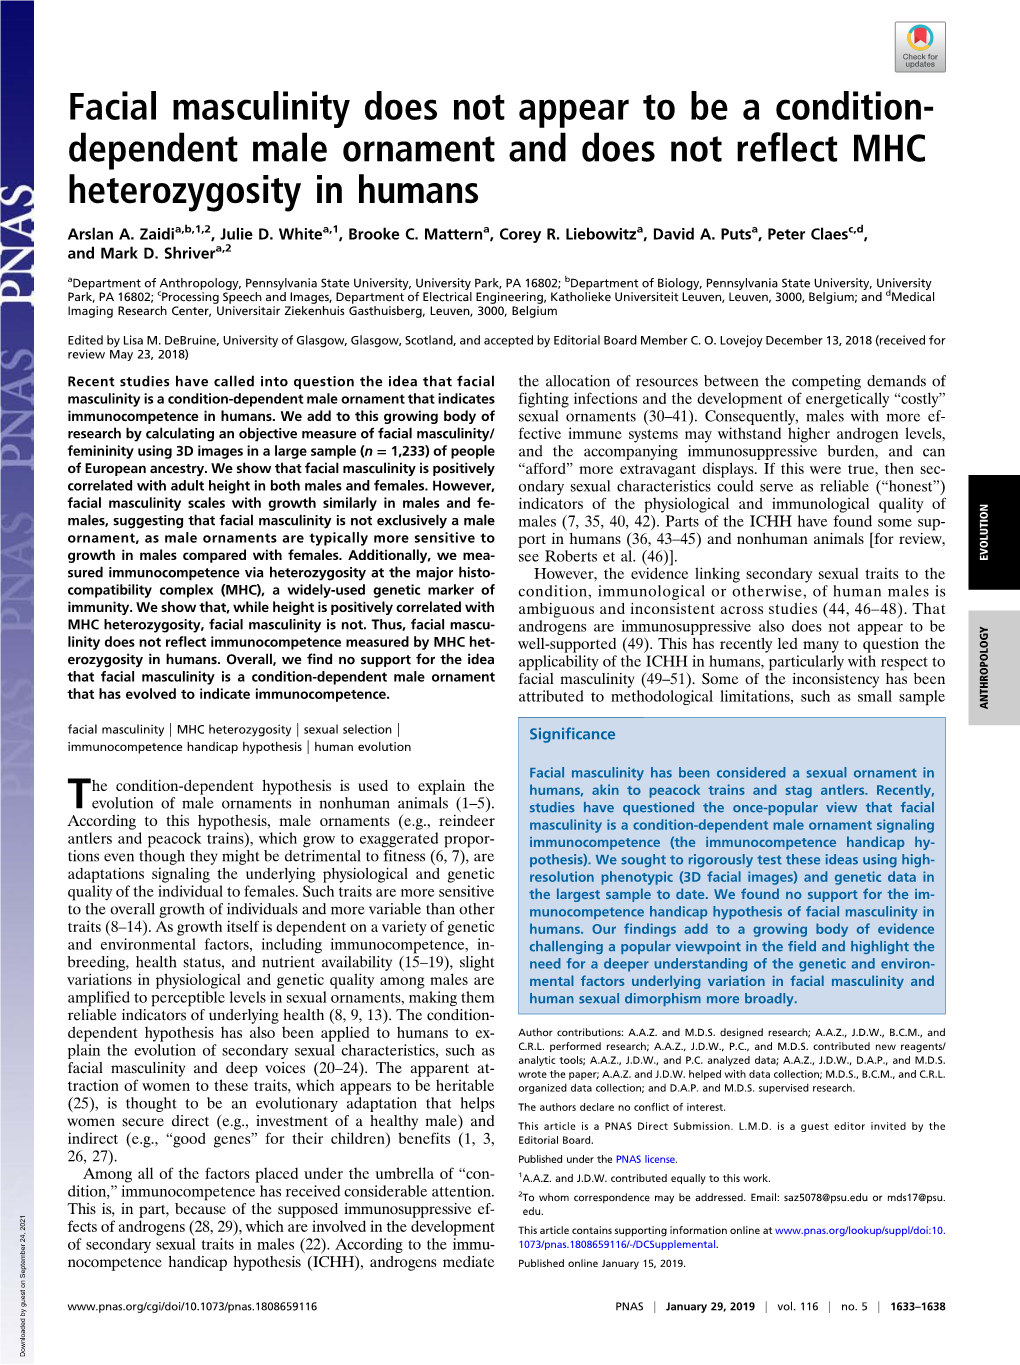 Dependent Male Ornament and Does Not Reflect MHC Heterozygosity in Humans